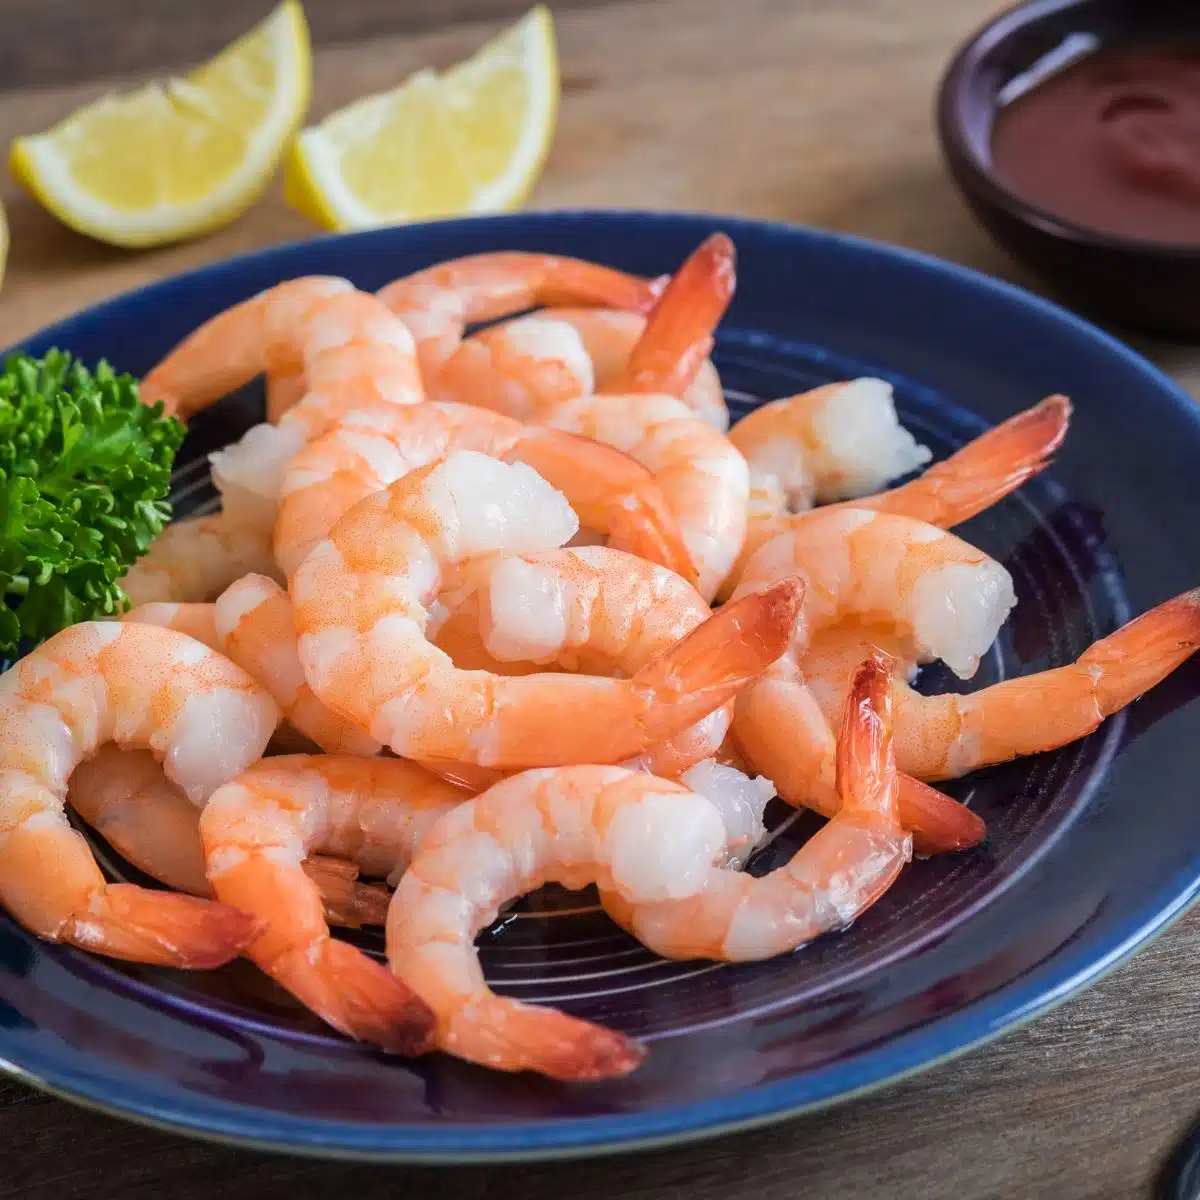 Square image of shrimp on a plate.